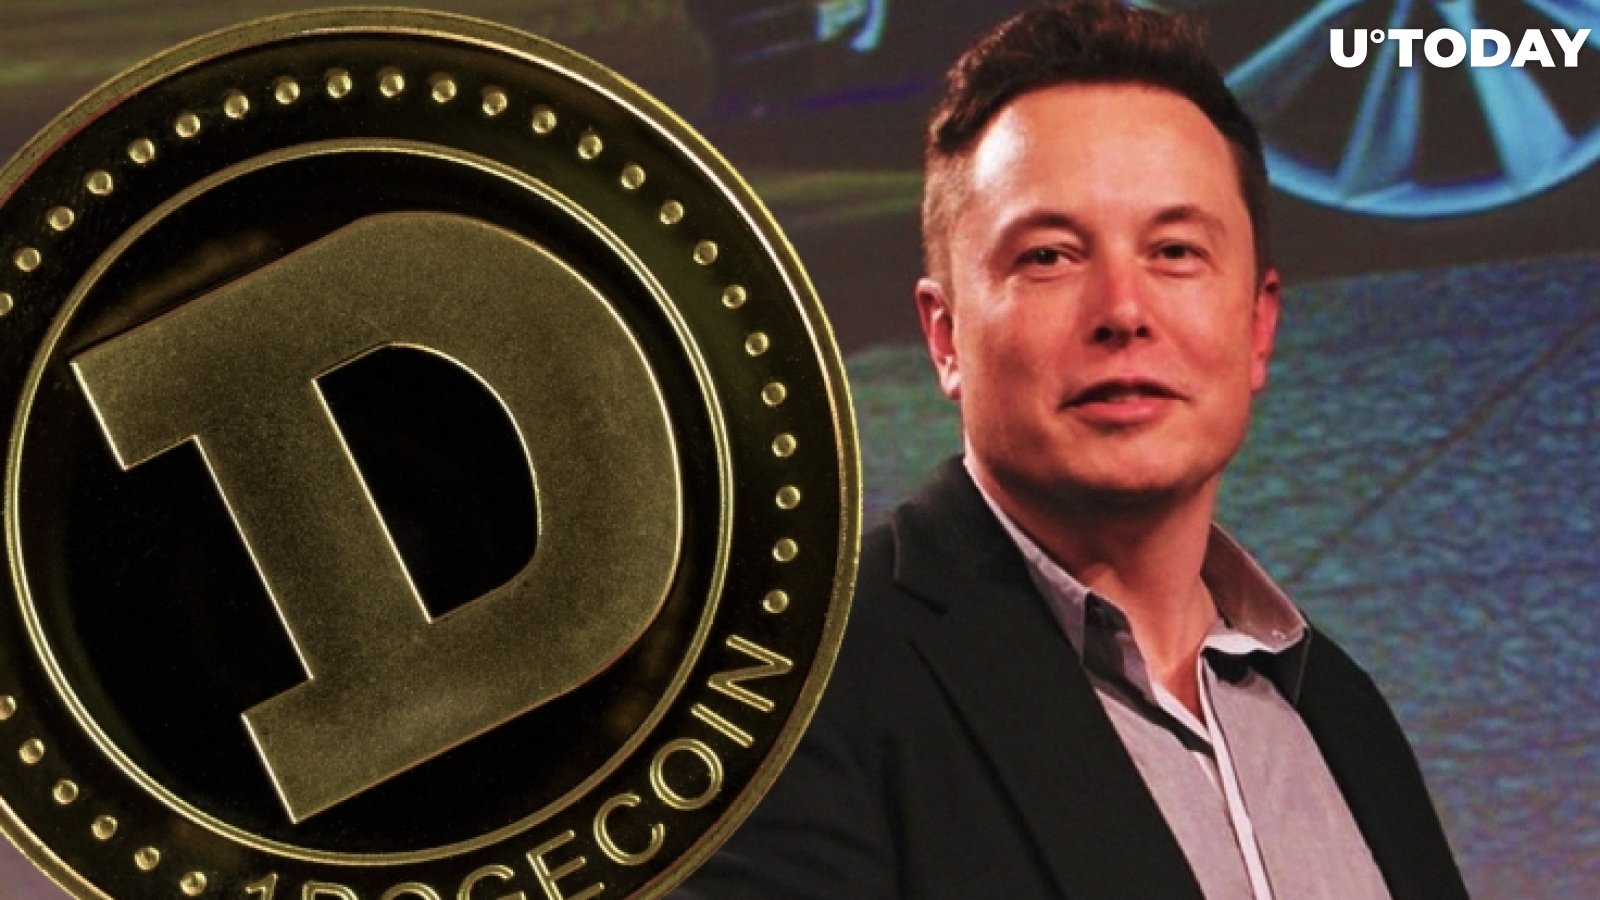 "Dogefather" Elon Musk Says Dogecoin Is Going to Take Over the World on "SNL," Mentions Bitcoin and Ethereum